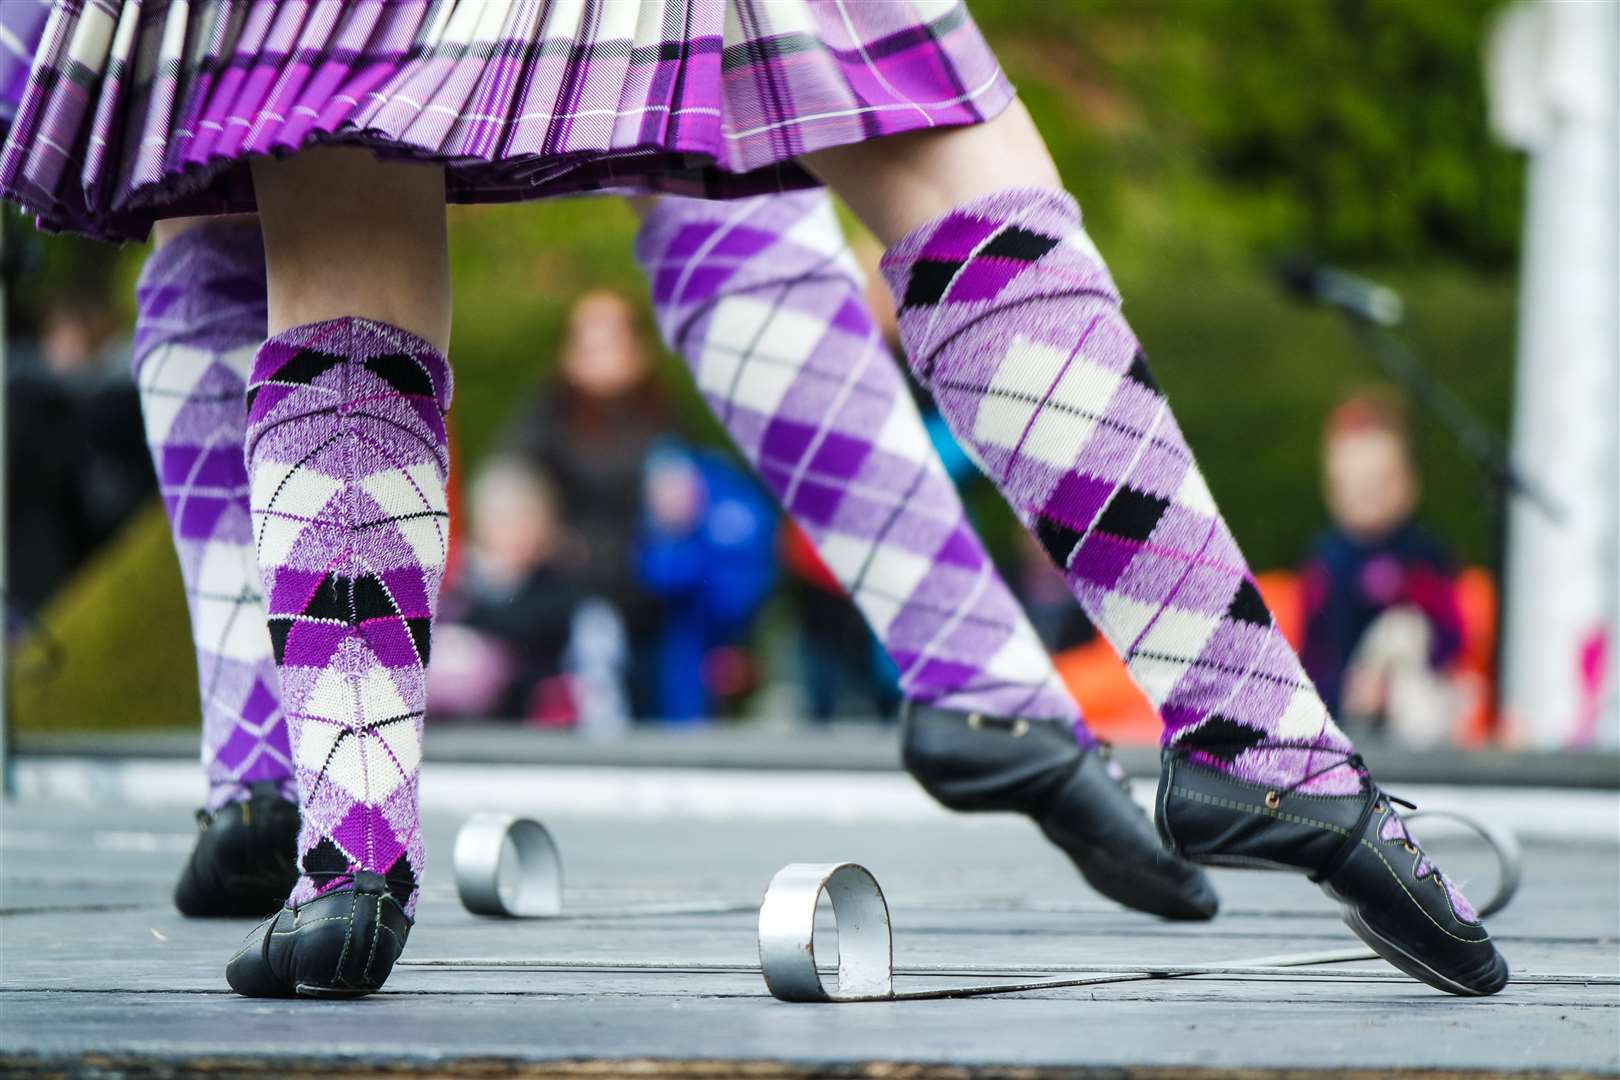 On Saturday (April 25) at 3pm dancers are being encouraged to dawn their dancing shoes once more to do either a jig or a hornpipe.